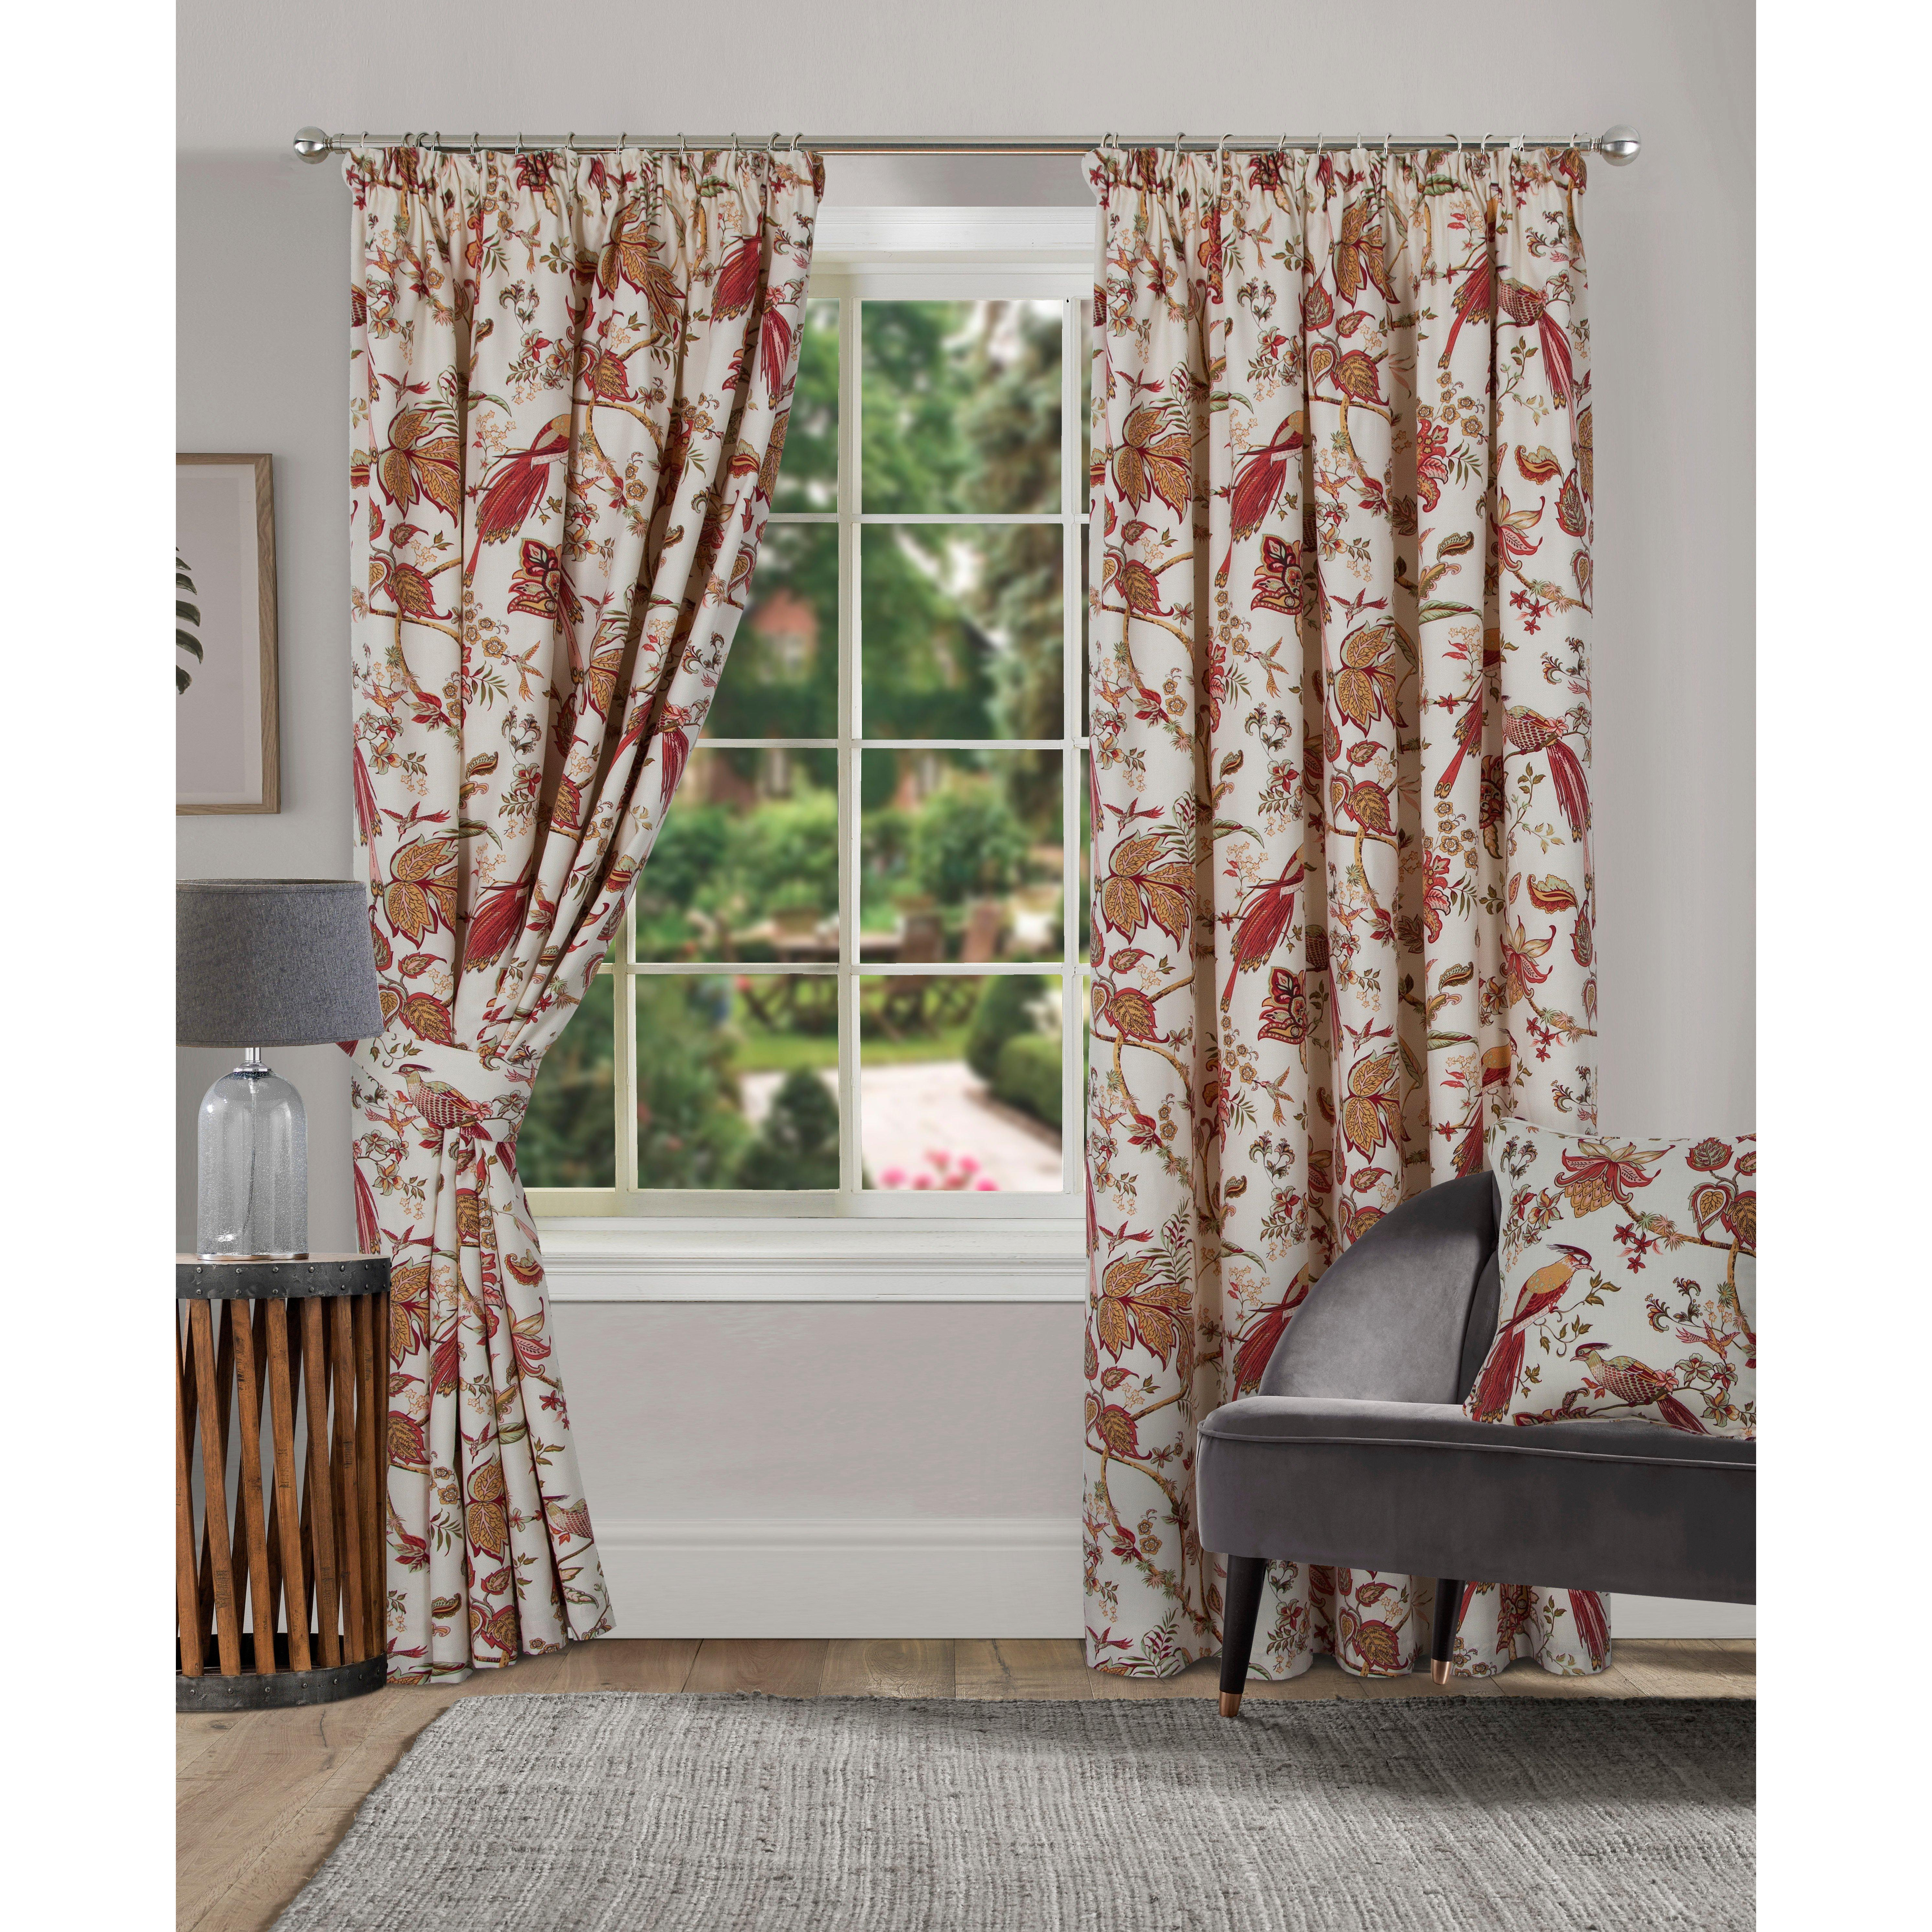 Kensington Fully Lined Botanical 3 inch Pencil Pleat Curtains pair - image 1